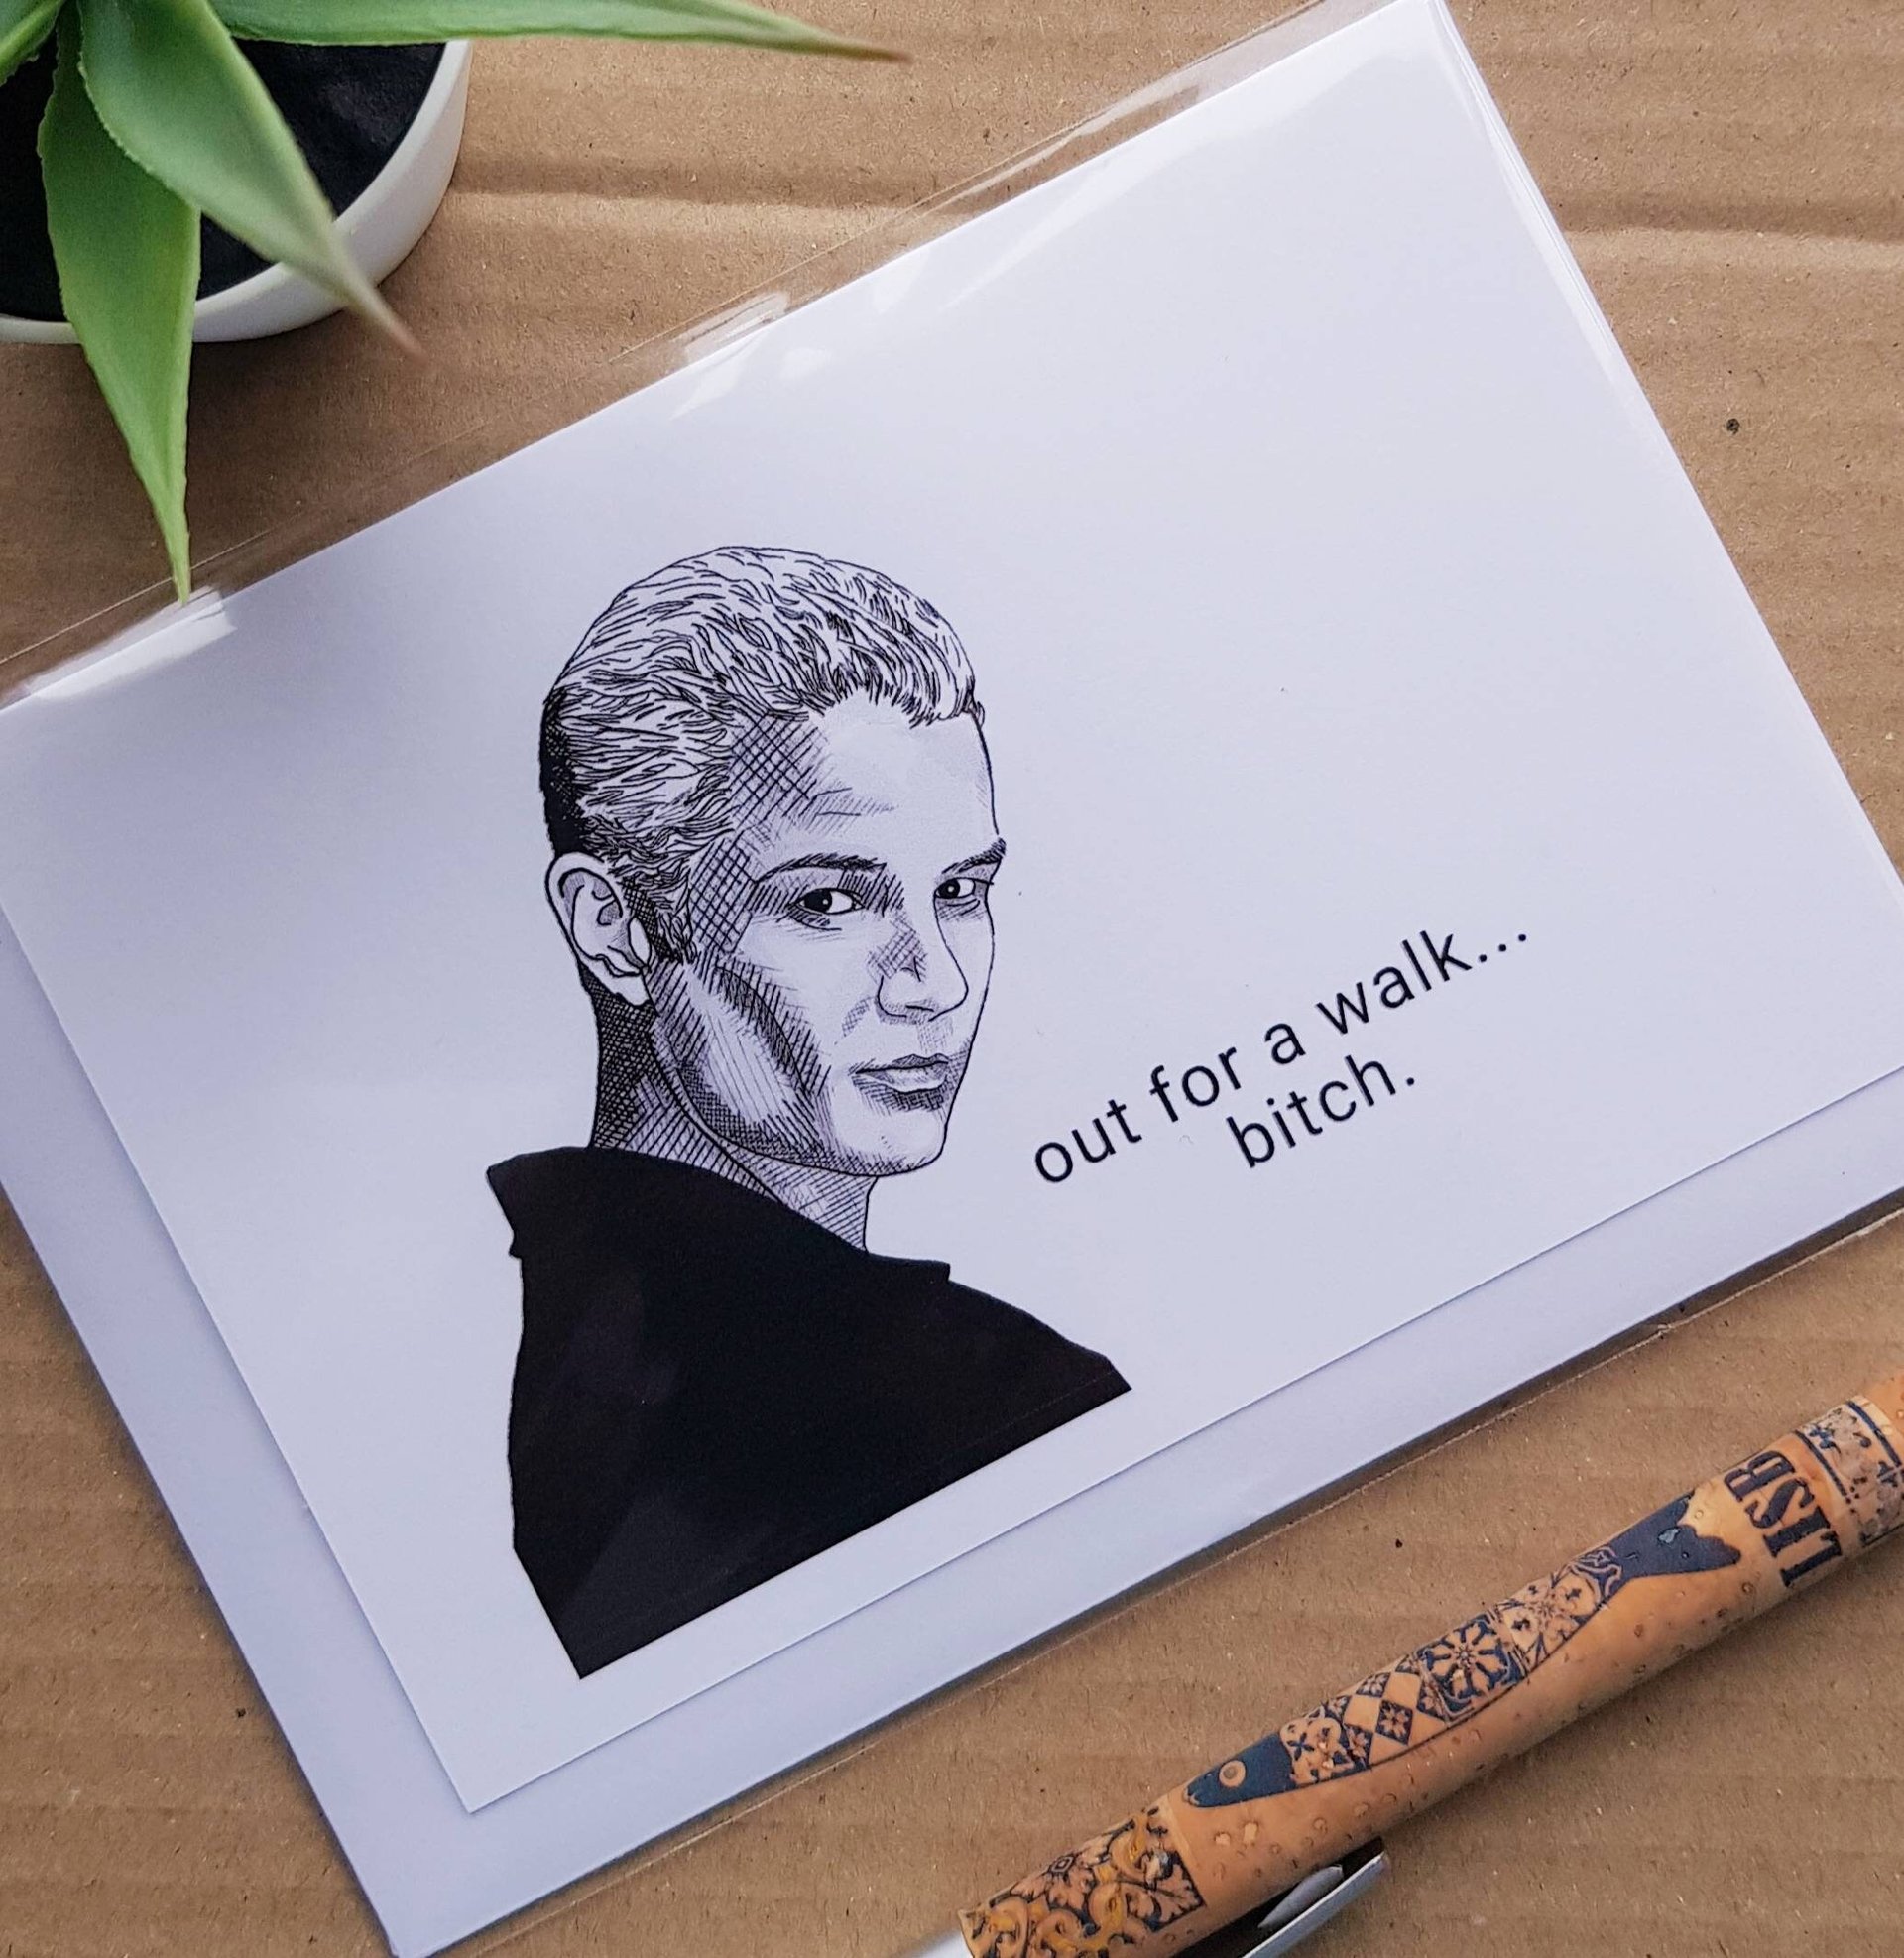 Funny Buffy Spike Birthday Card - Out for a walk Bitch